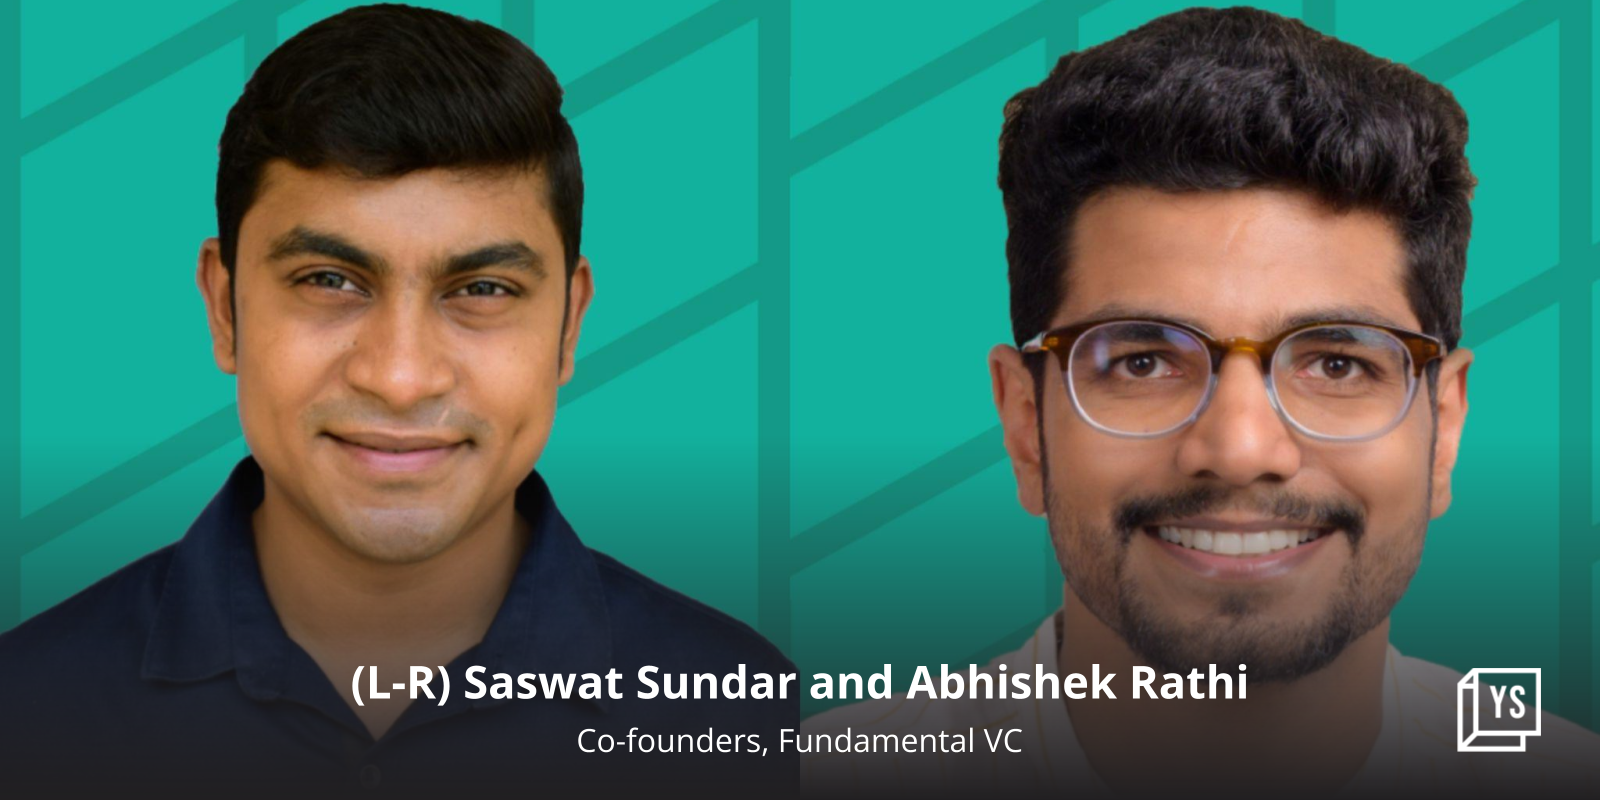 Fundamental VC launches $130M maiden fund to invest in early-stage startups

